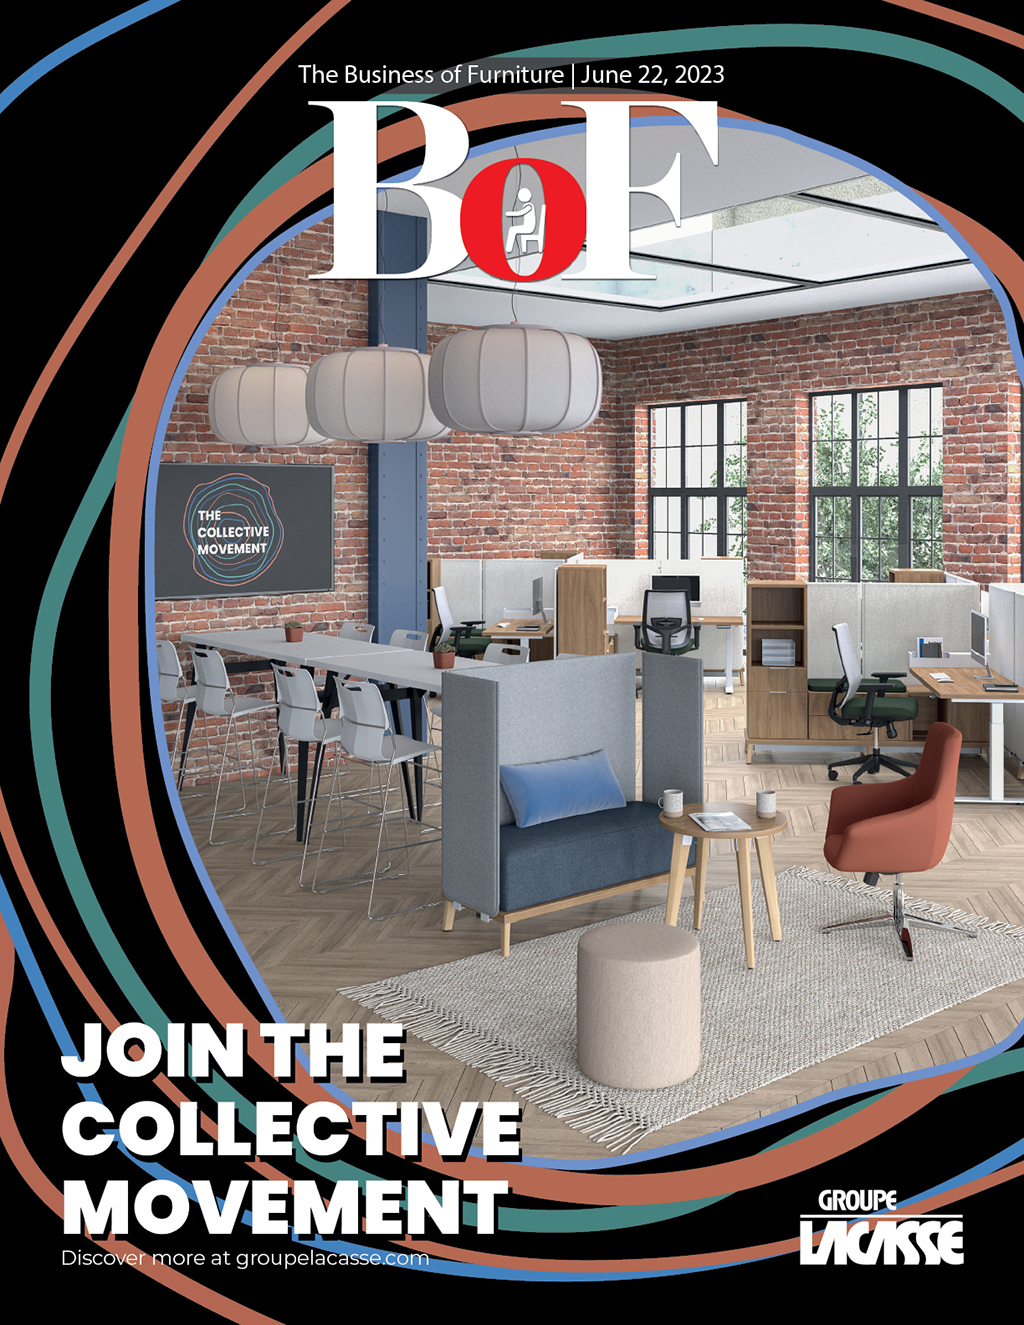 Bellow Press - Previous Editions of Workplaces Magazine and The Business of  Furniture